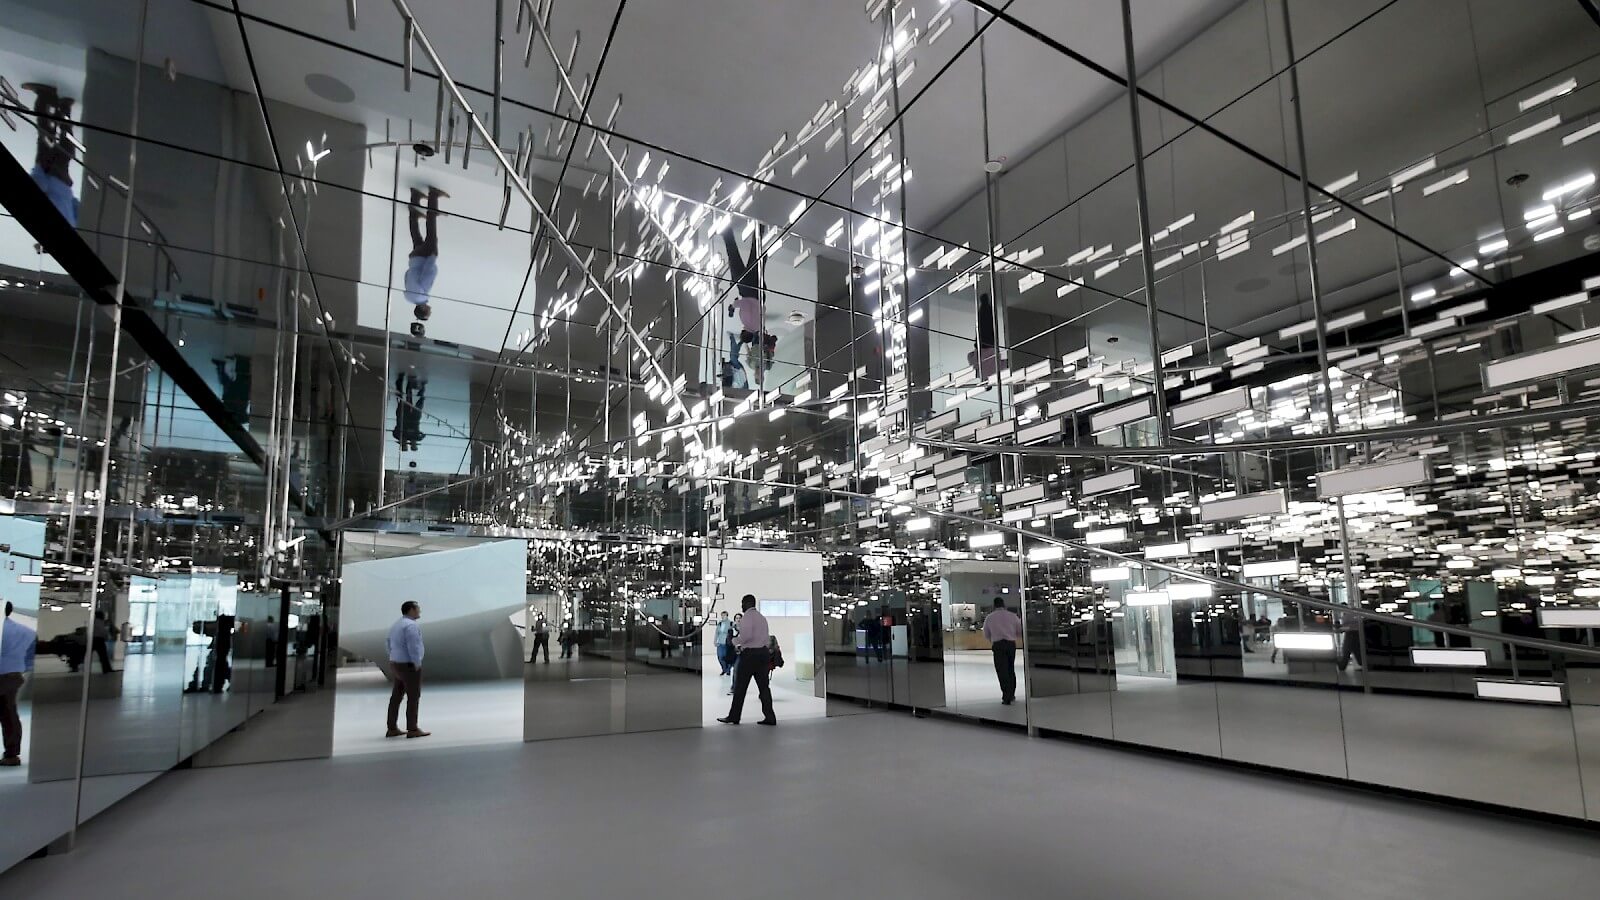 People in front of the OLED lighting installation Light Cloud